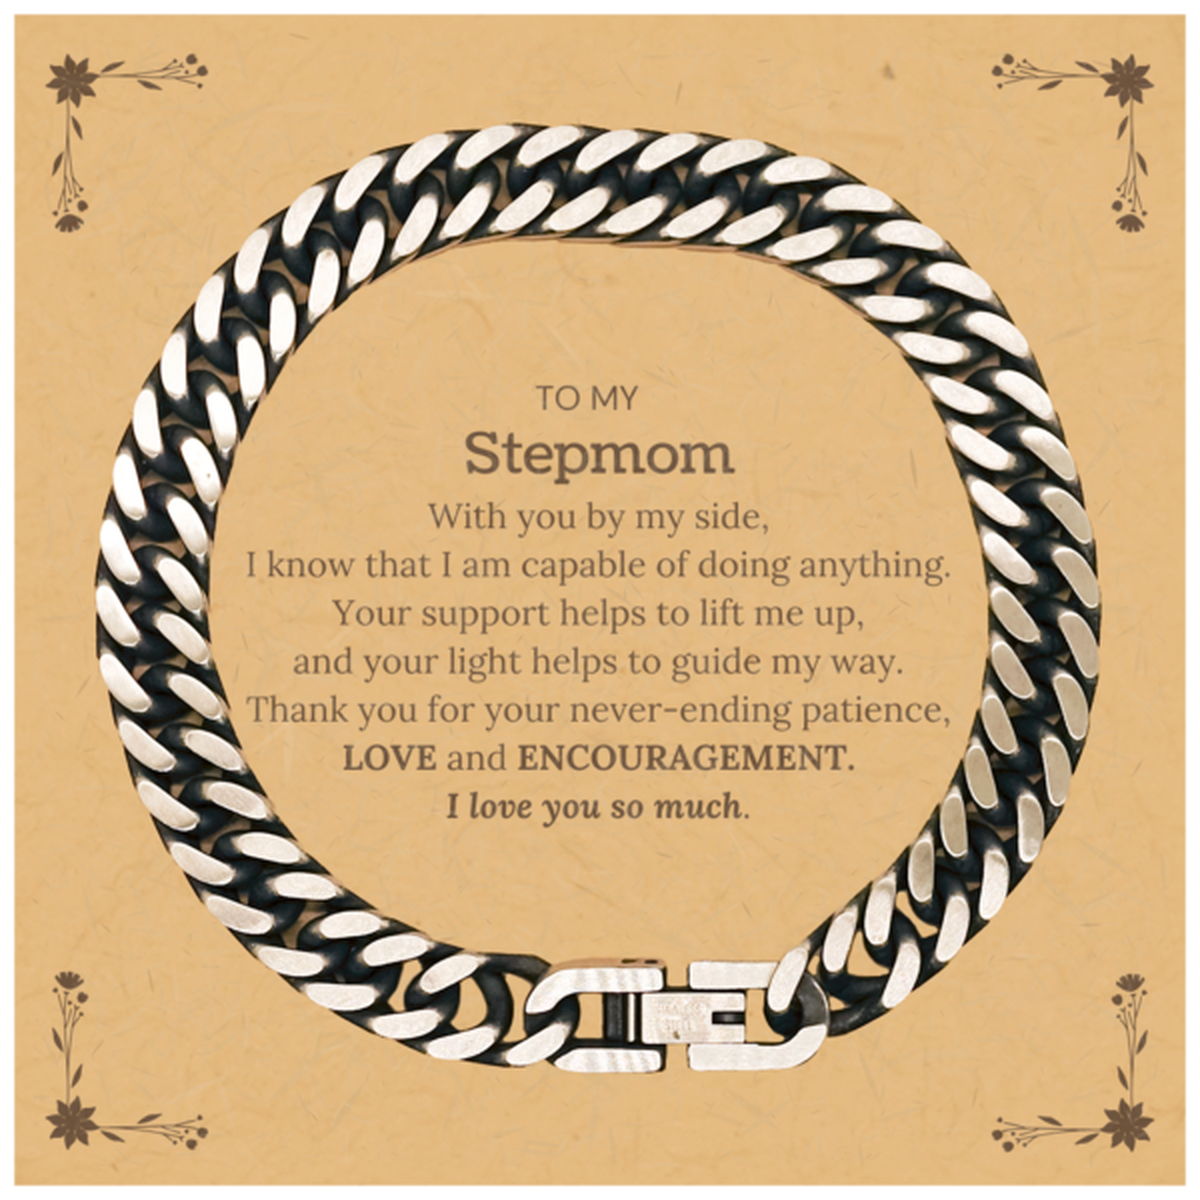 Appreciation Stepmom Cuban Link Chain Bracelet Gifts, To My Stepmom Birthday Christmas Wedding Keepsake Gifts for Stepmom With you by my side, I know that I am capable of doing anything. I love you so much